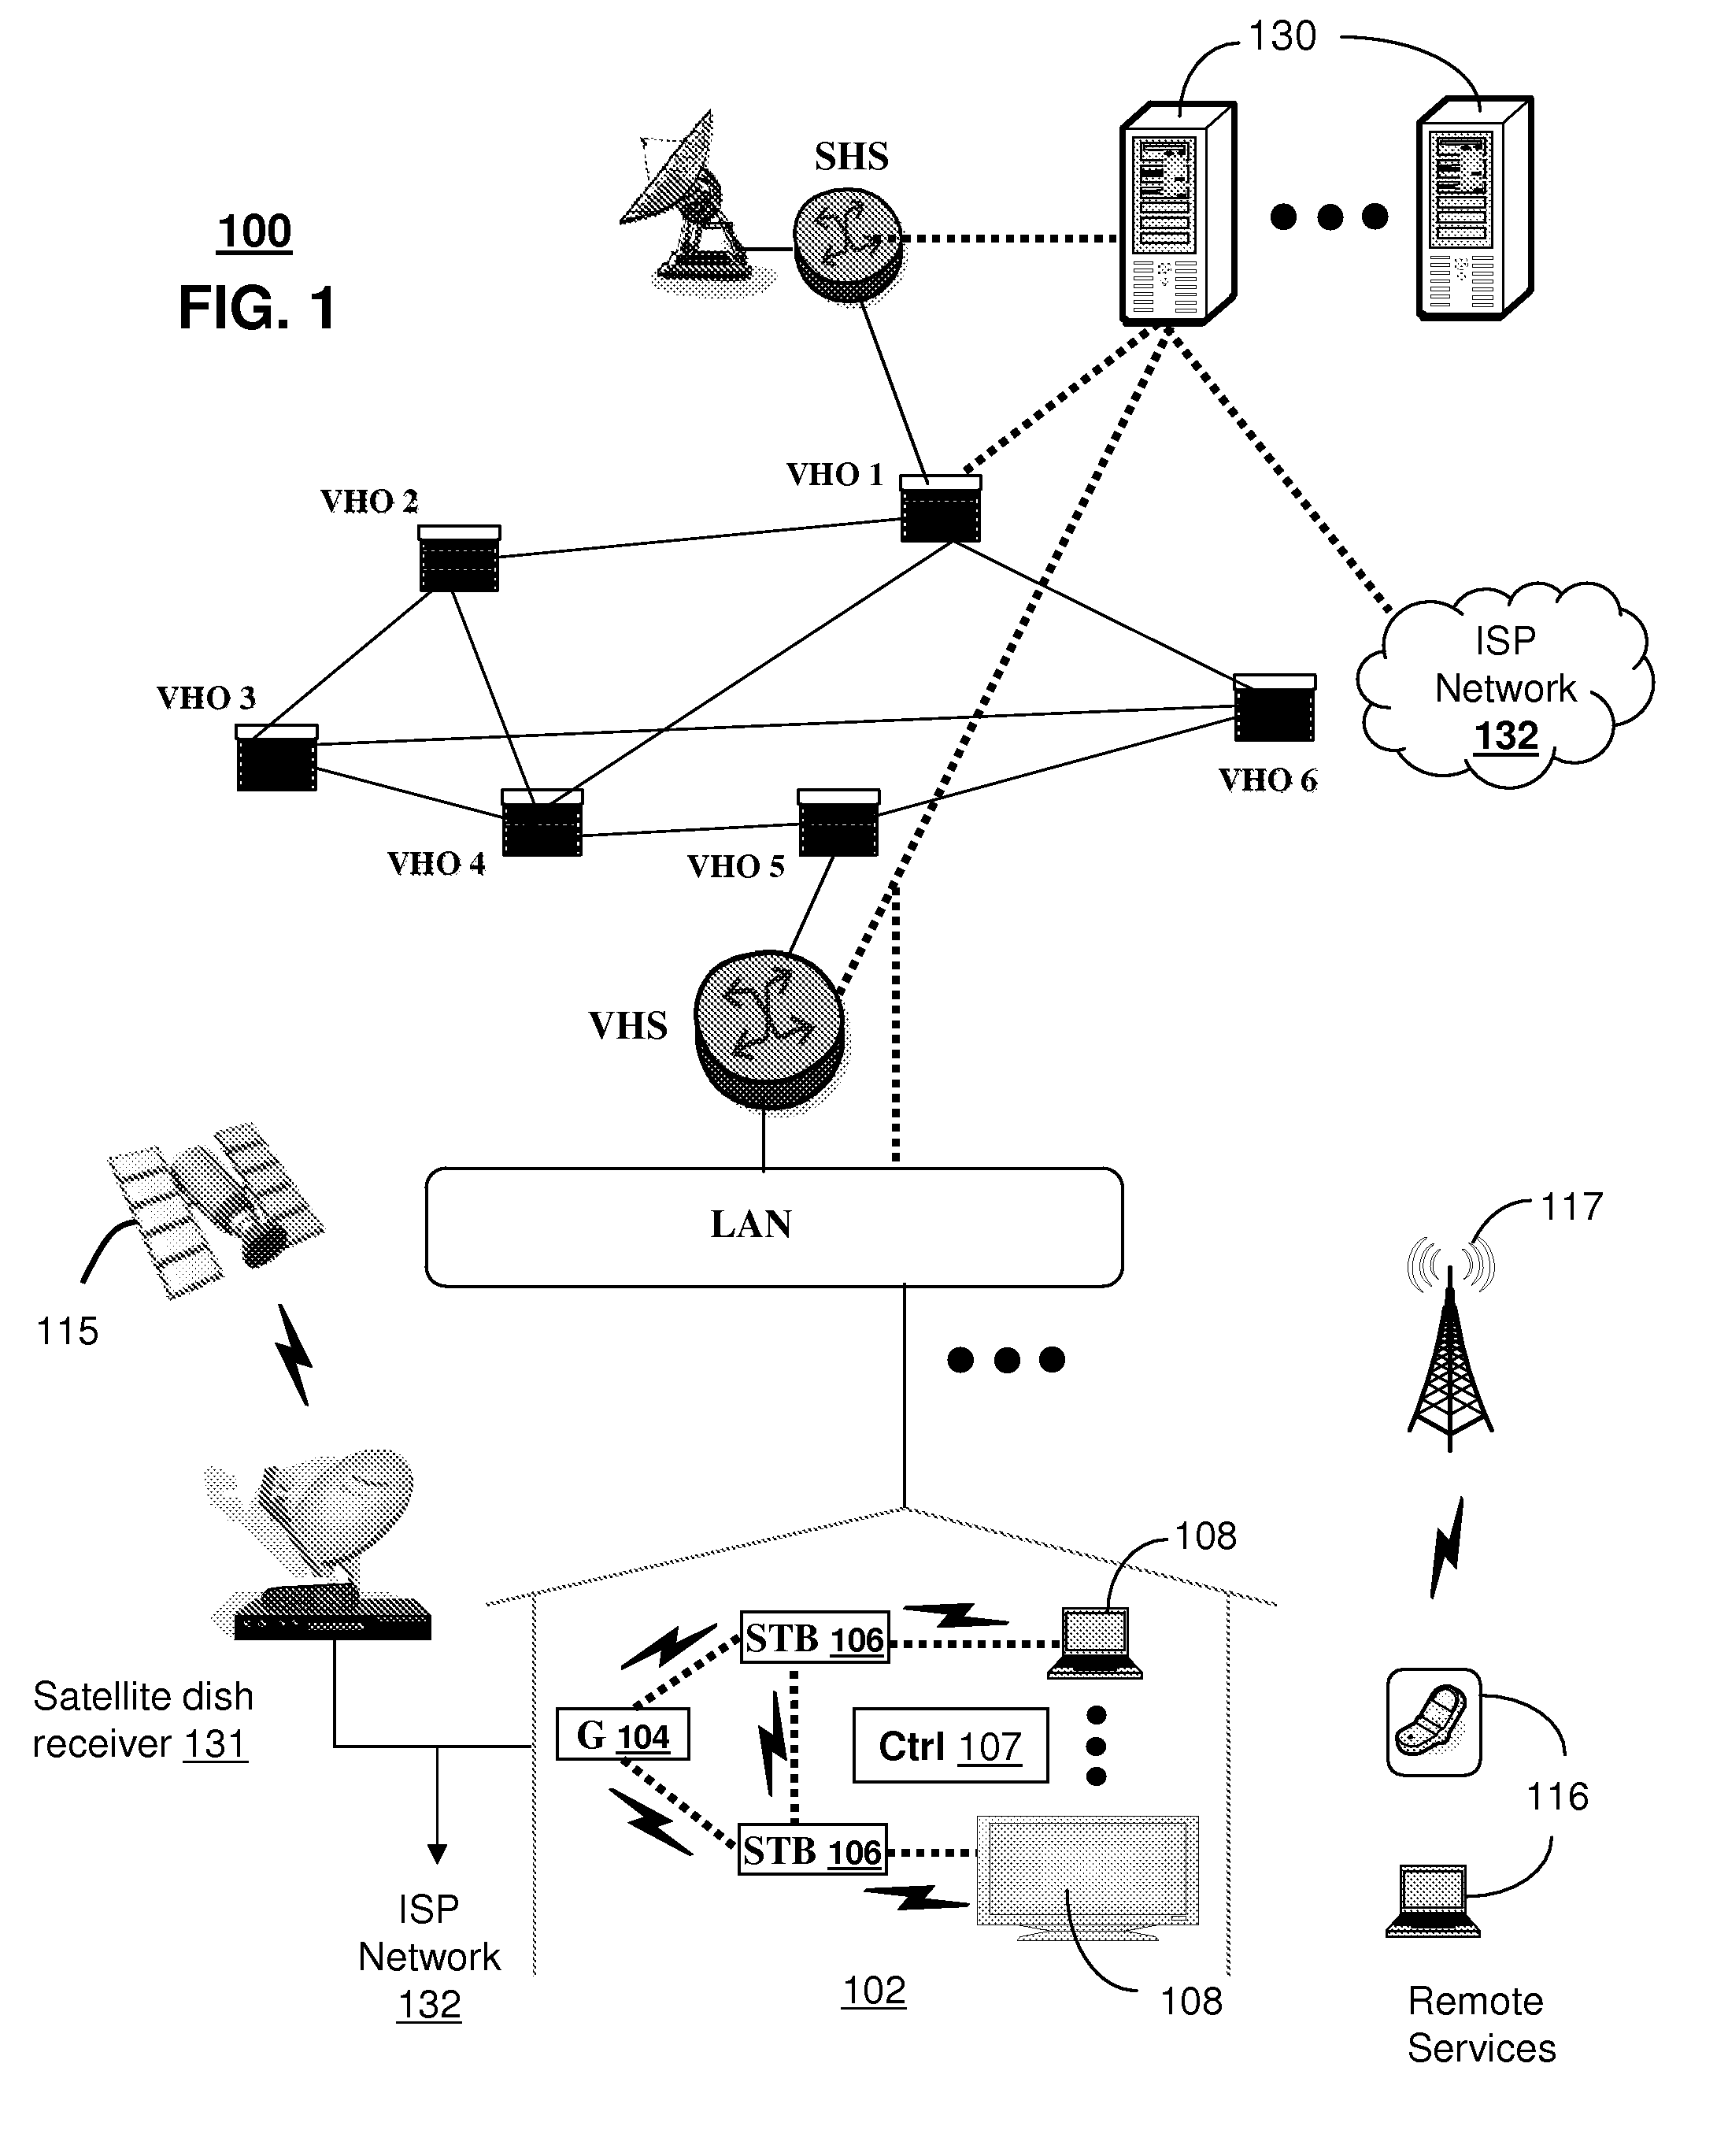 System for exchanging media content between a media content processor and a communication device